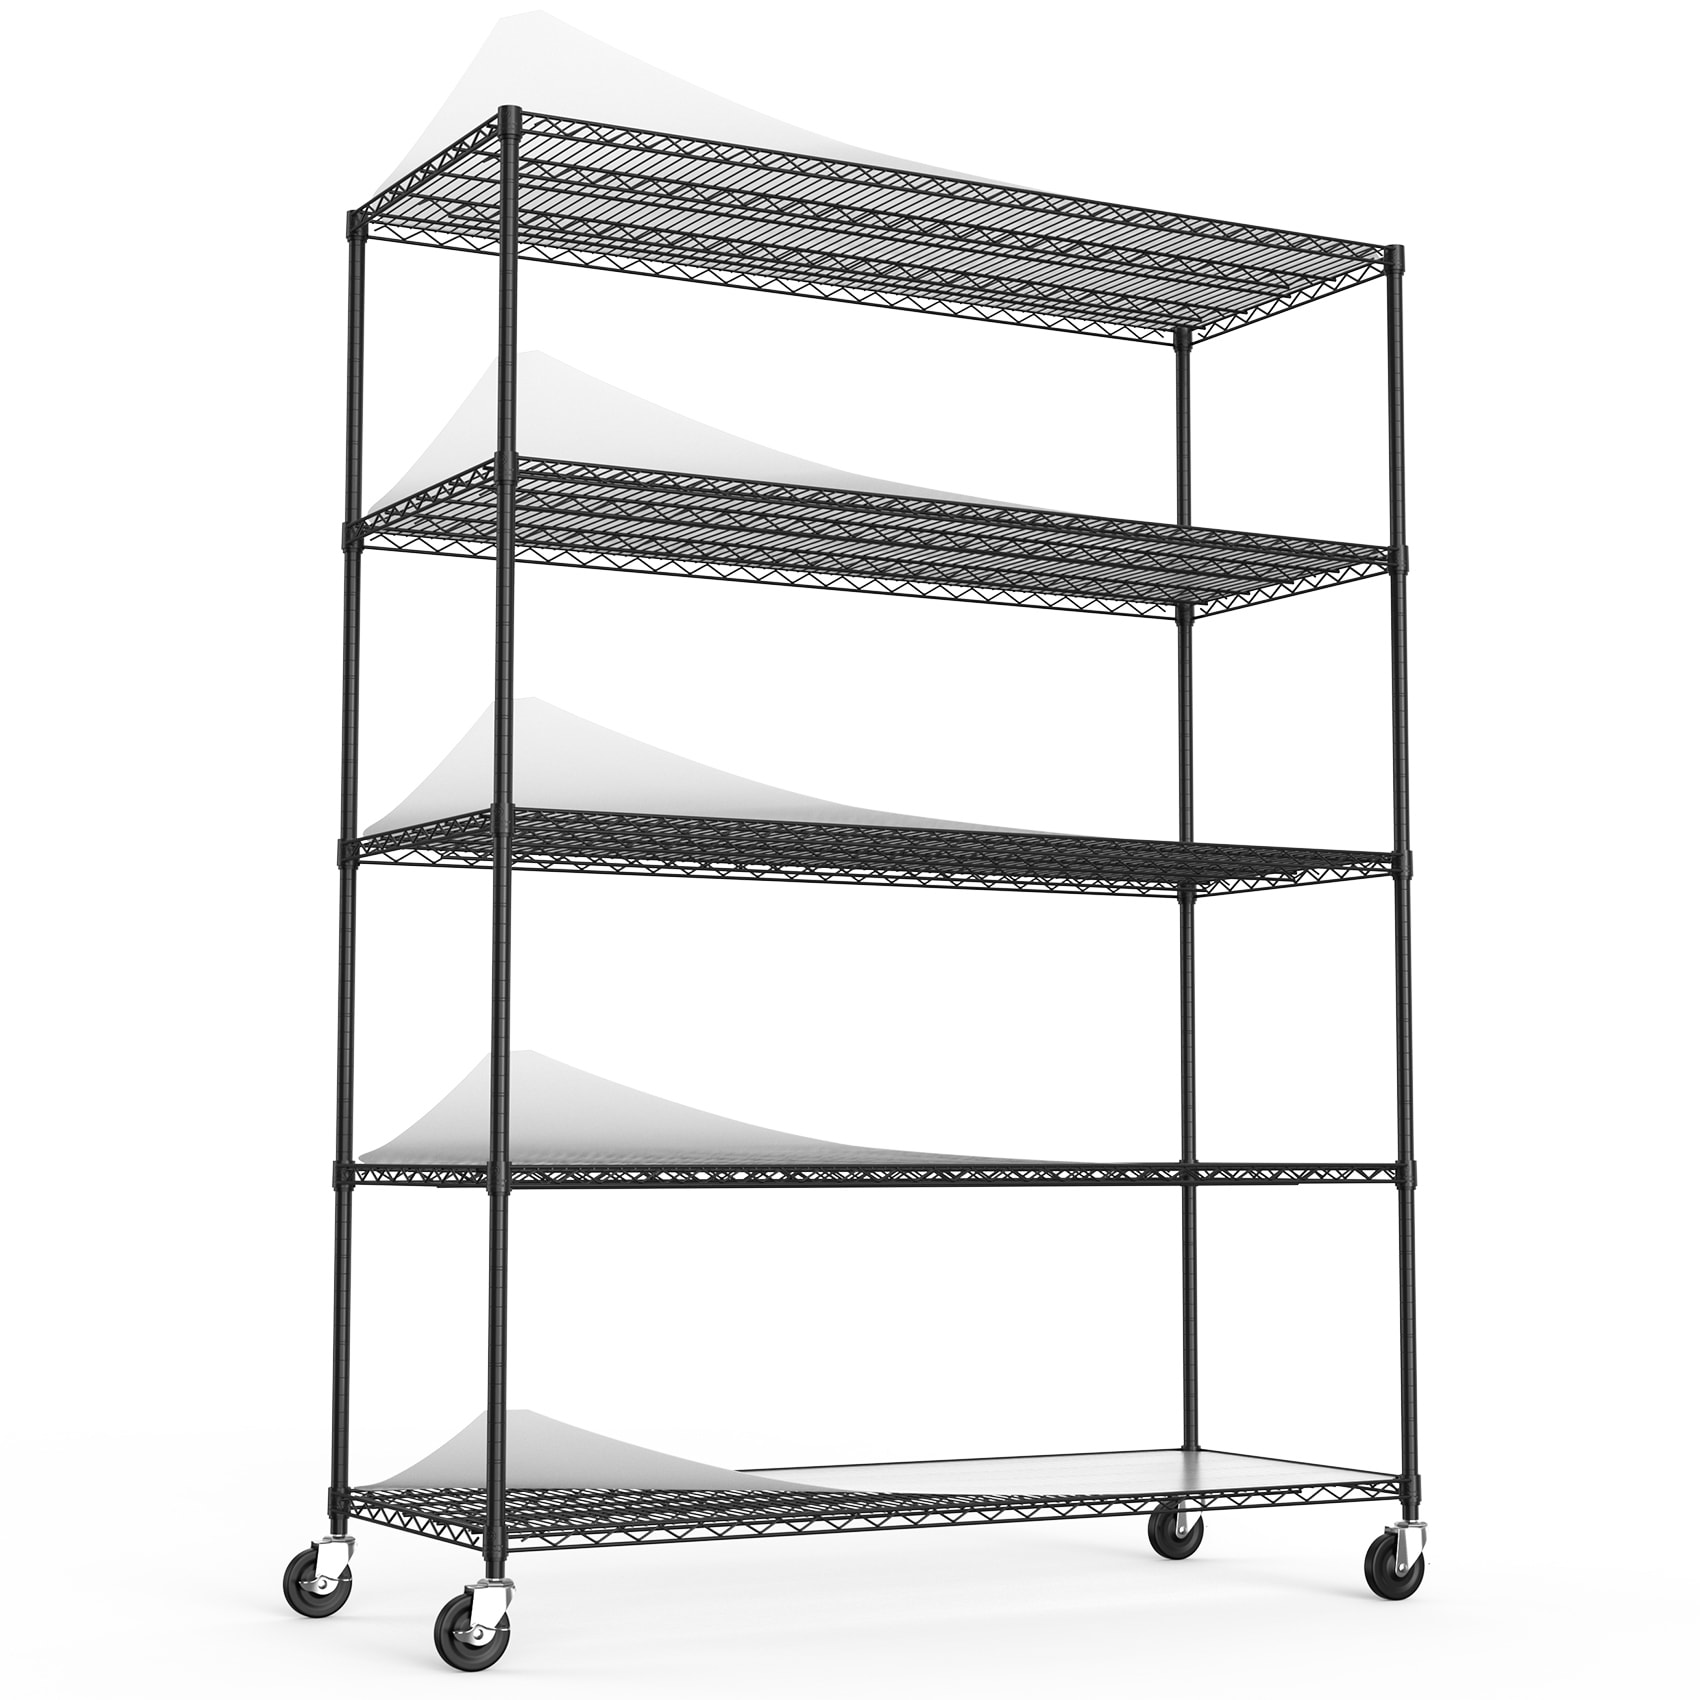 https://ak1.ostkcdn.com/images/products/is/images/direct/4fed08a276d6ed669d2cd2e117aa0d55ec3c3d43/5-Tier-7500lbs-Capacity-NSF-Metal-Shelf-Wire-Shelving-Unit-with-Wheels-and-Shelf-Liners-for-Kitchen-%2CGarages.jpg